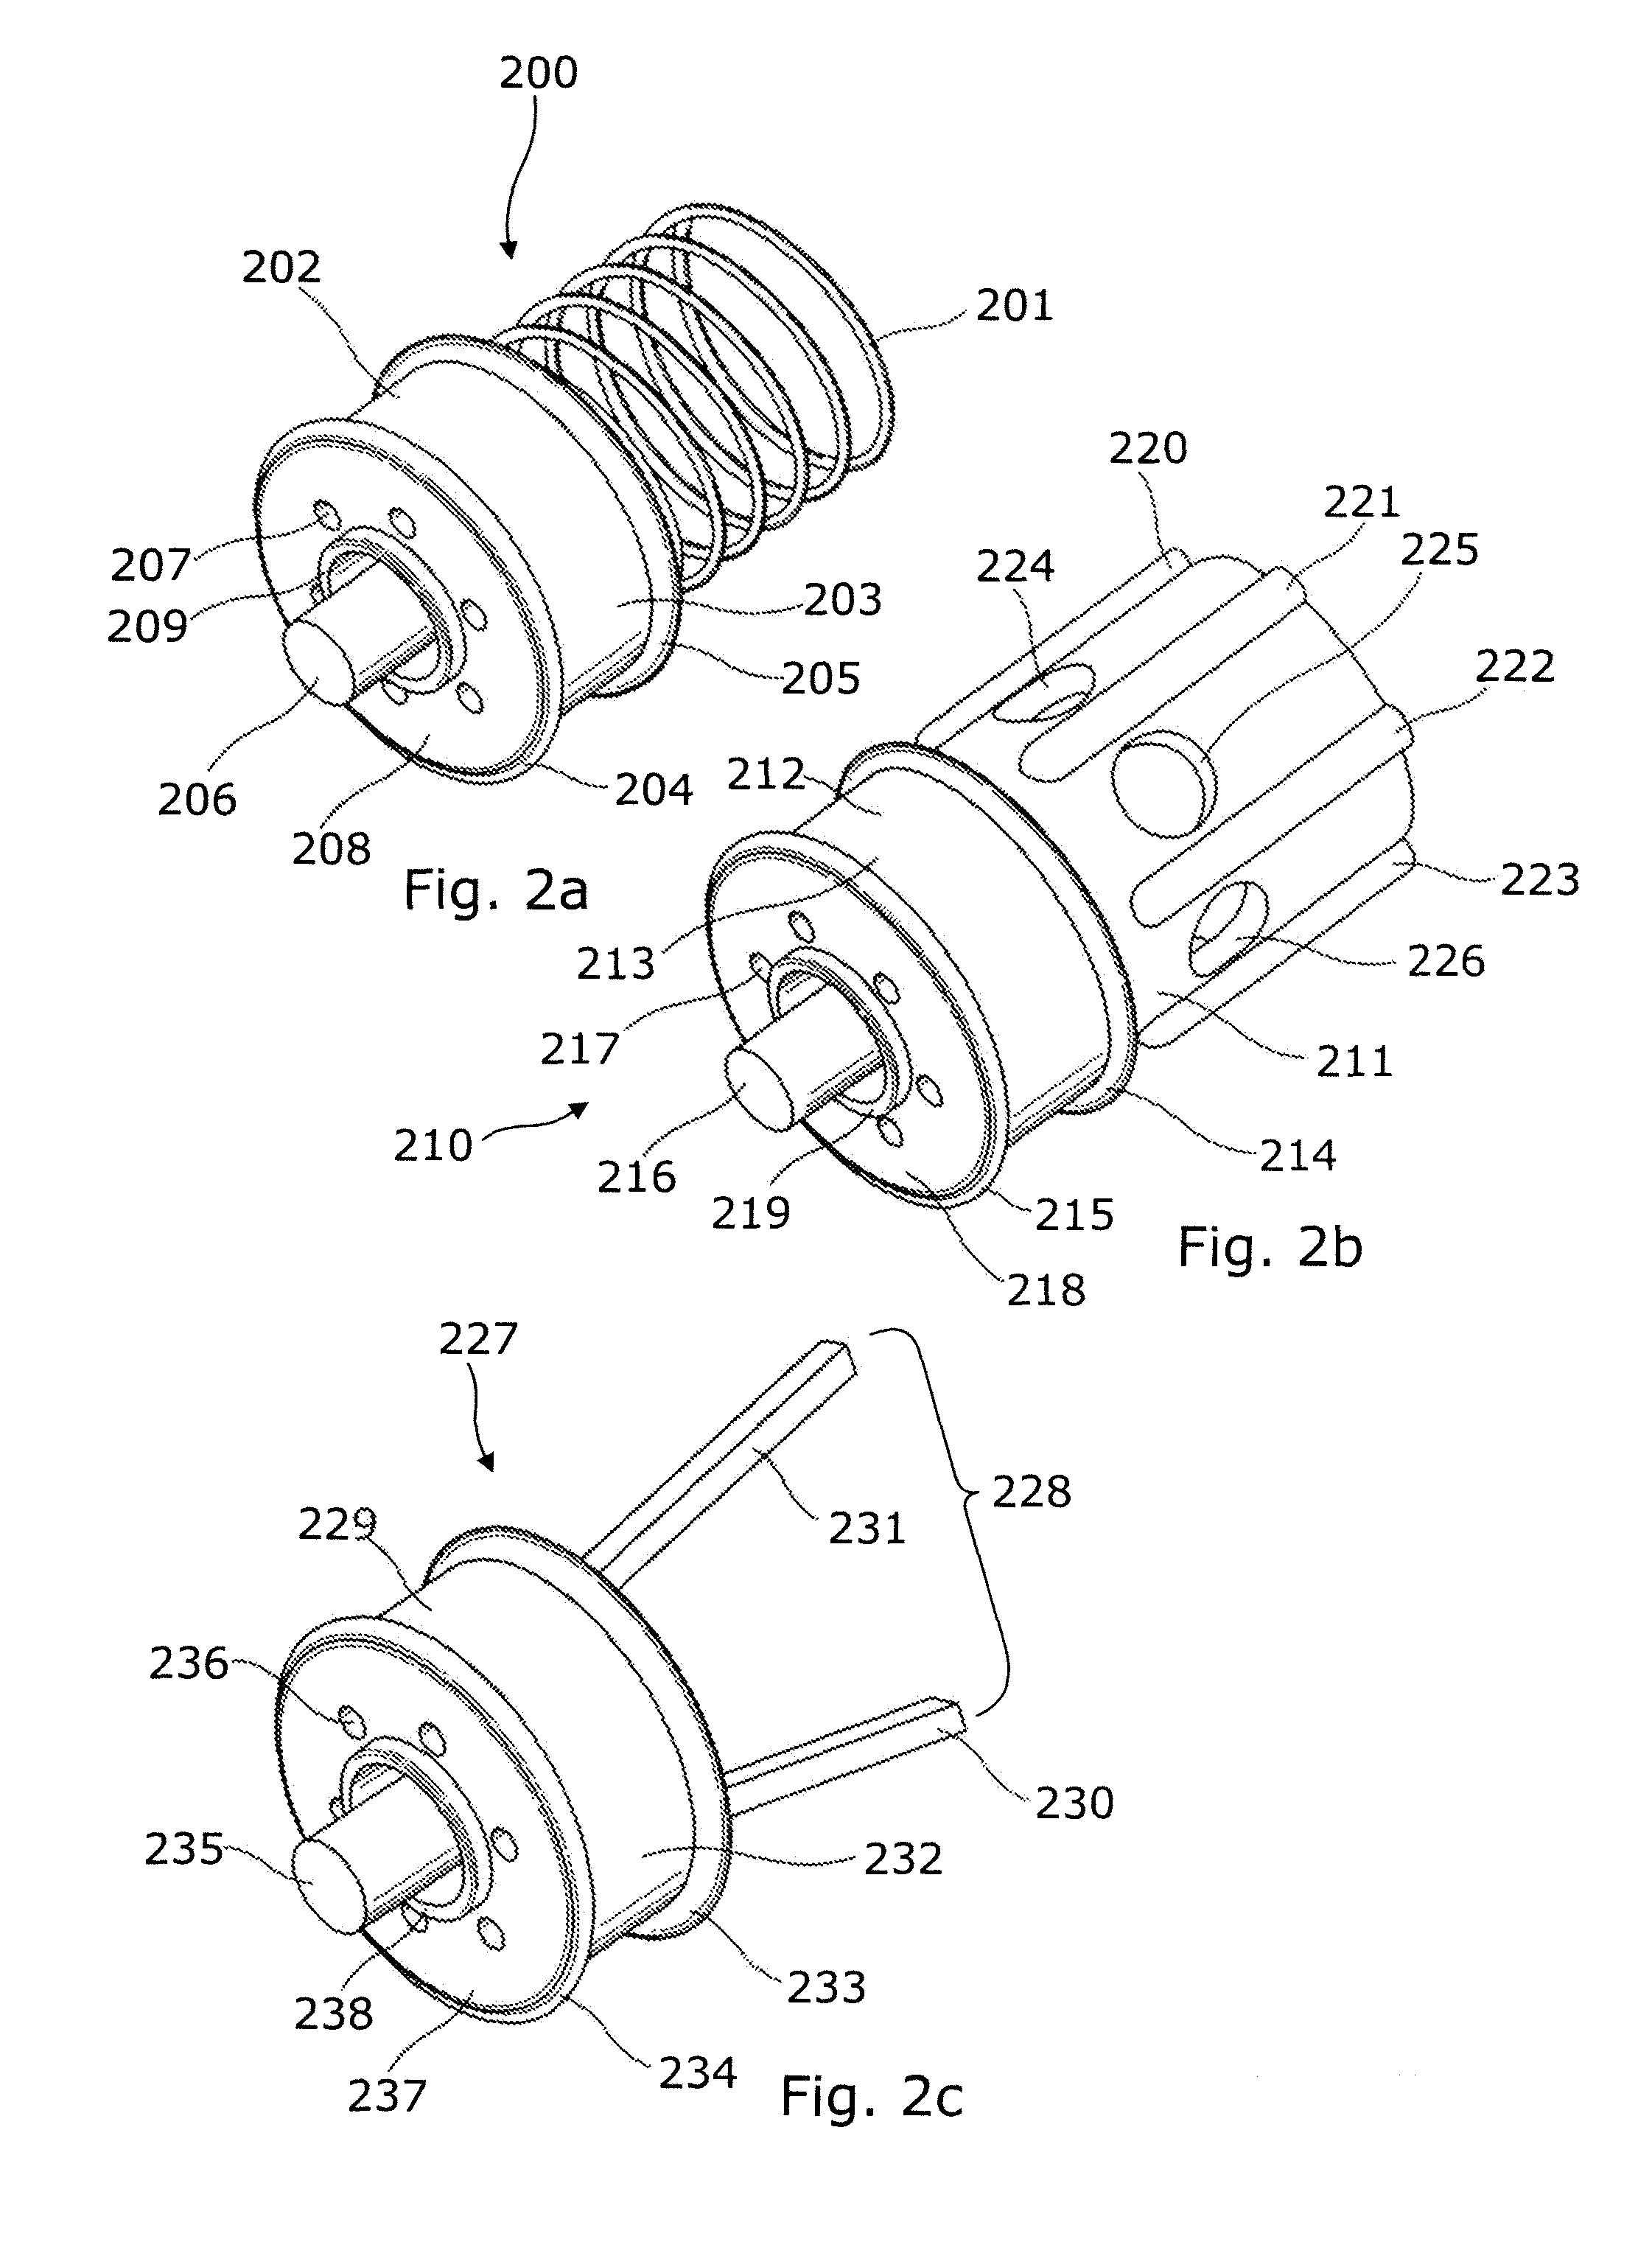 Valve system for inflatable medical device